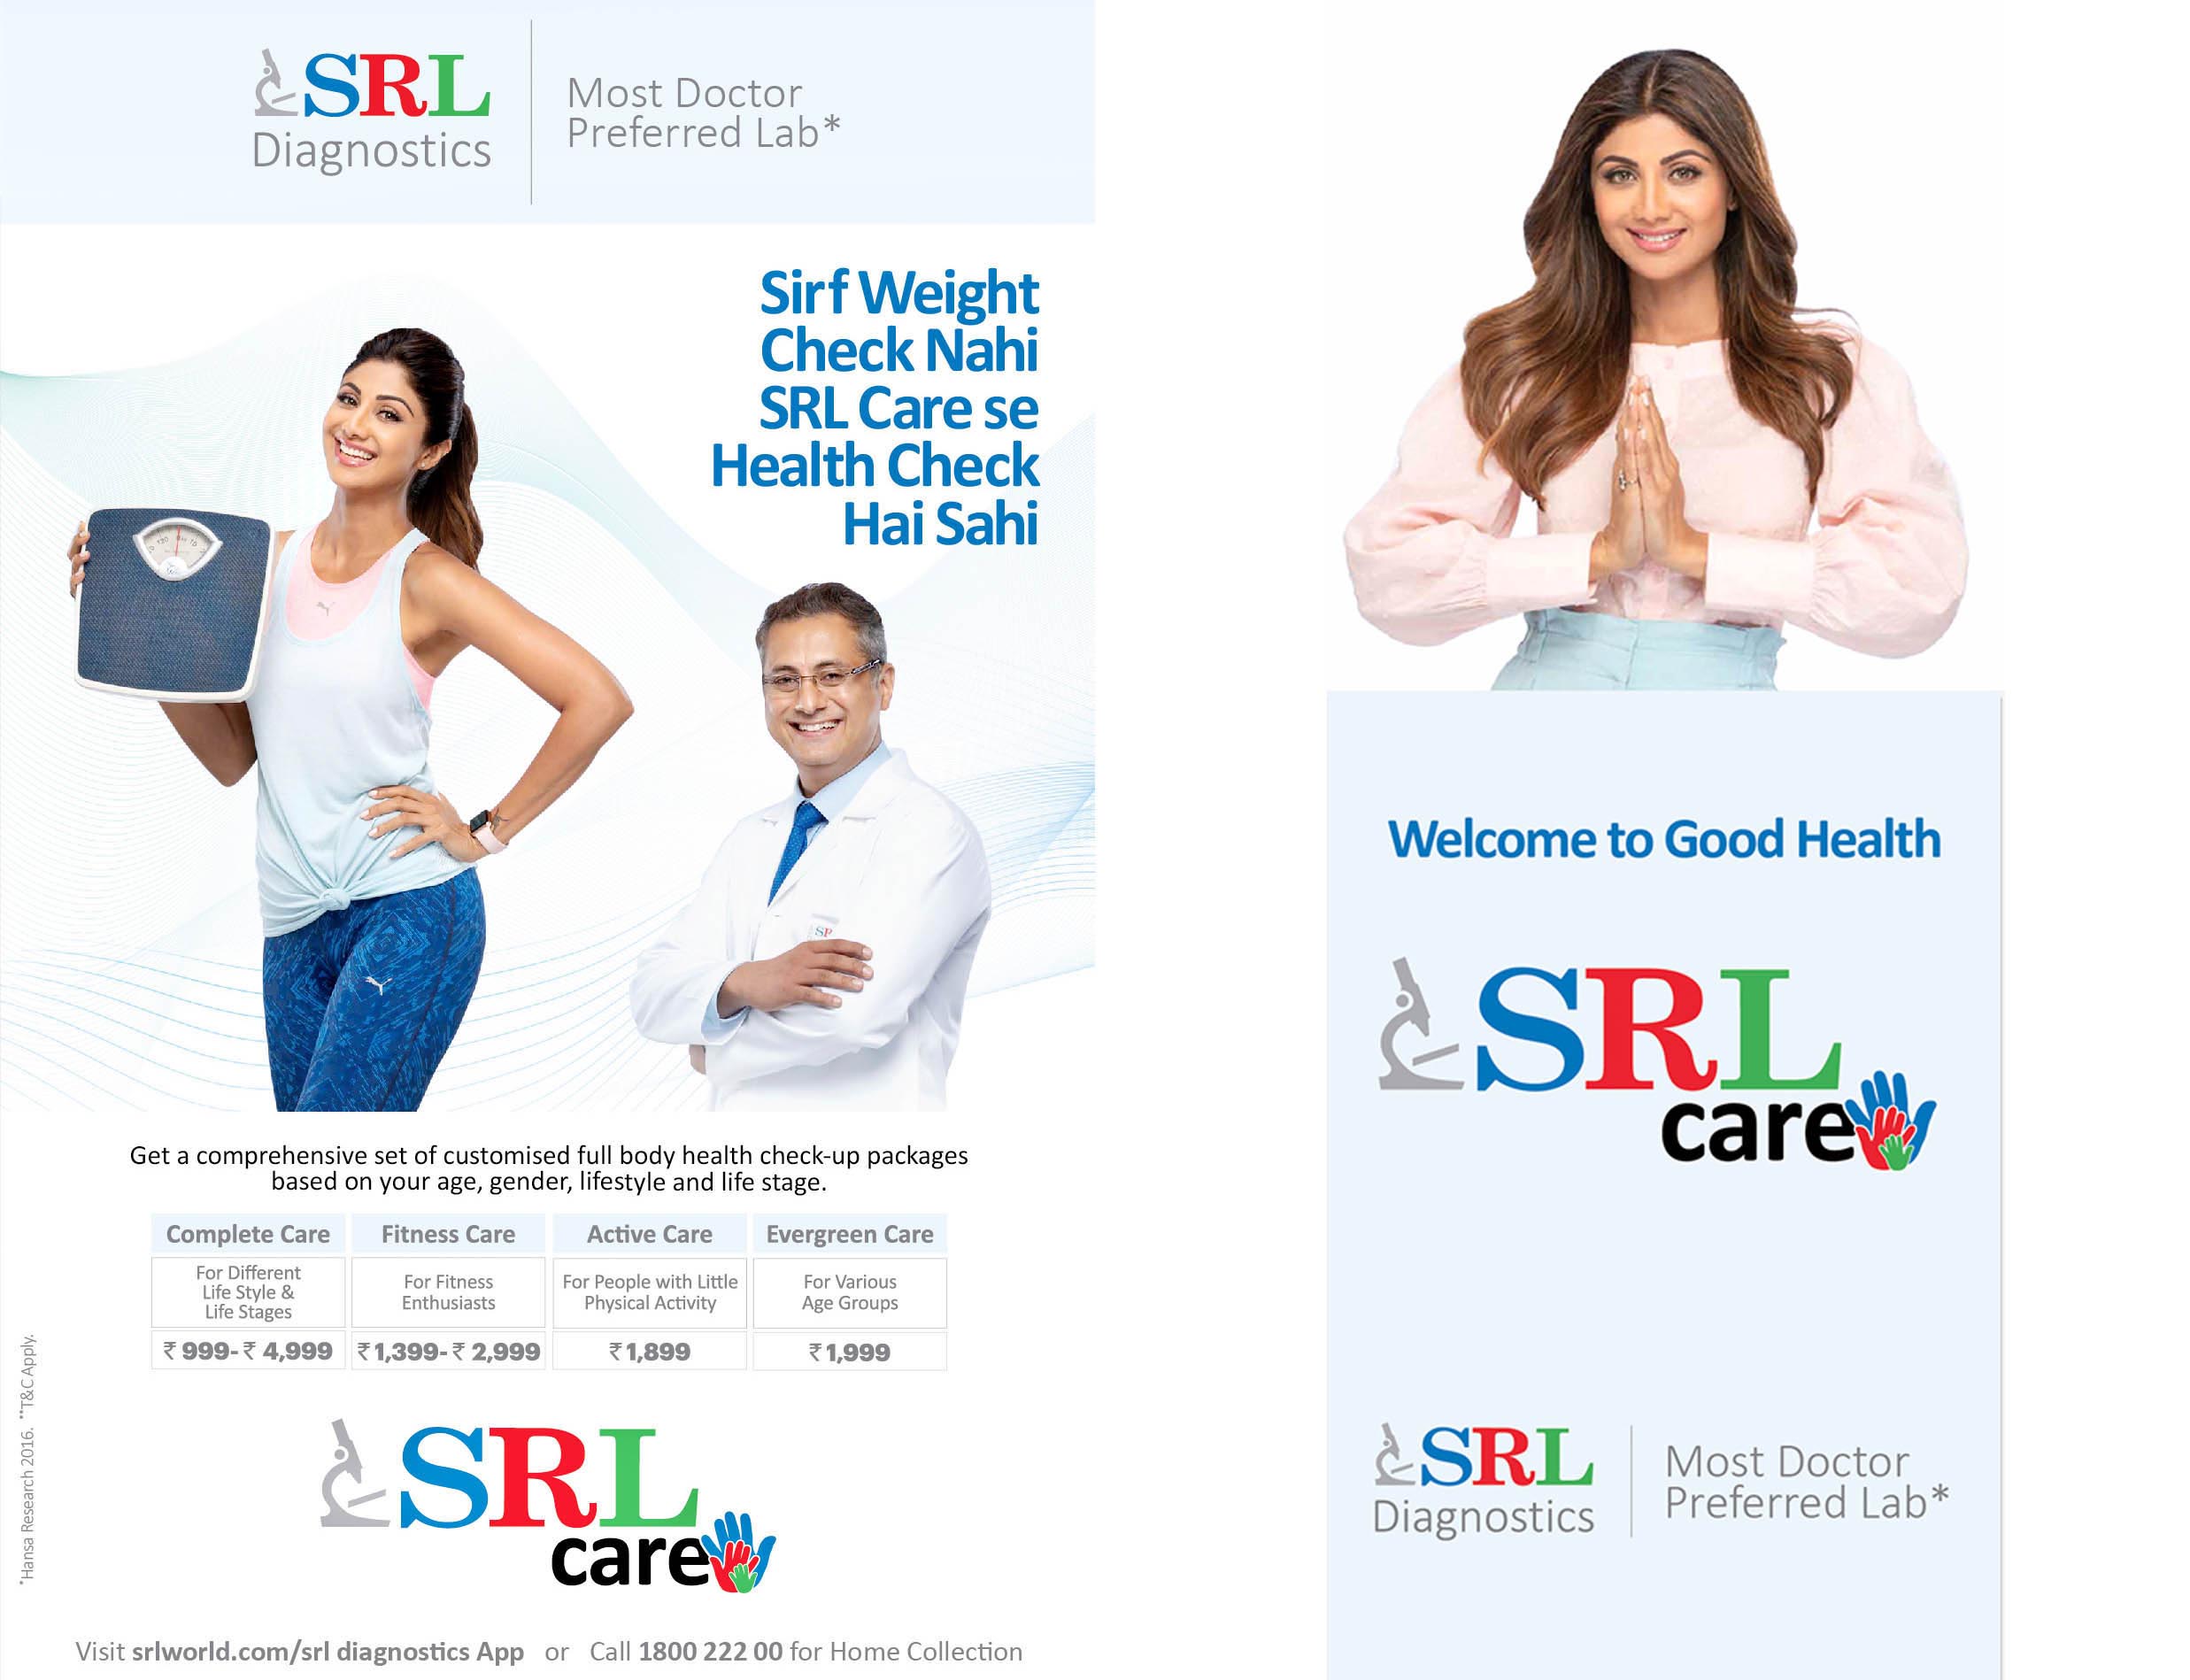 Best Commercial Photographer in India Vikram Singh Bawa, Actress Shilpa Shetty for SRL Diagnostics, Health, Lab, Fittness, Product Photography, Advertising, Best Advertising Photographer Vikram Bawa in Mumbai, India